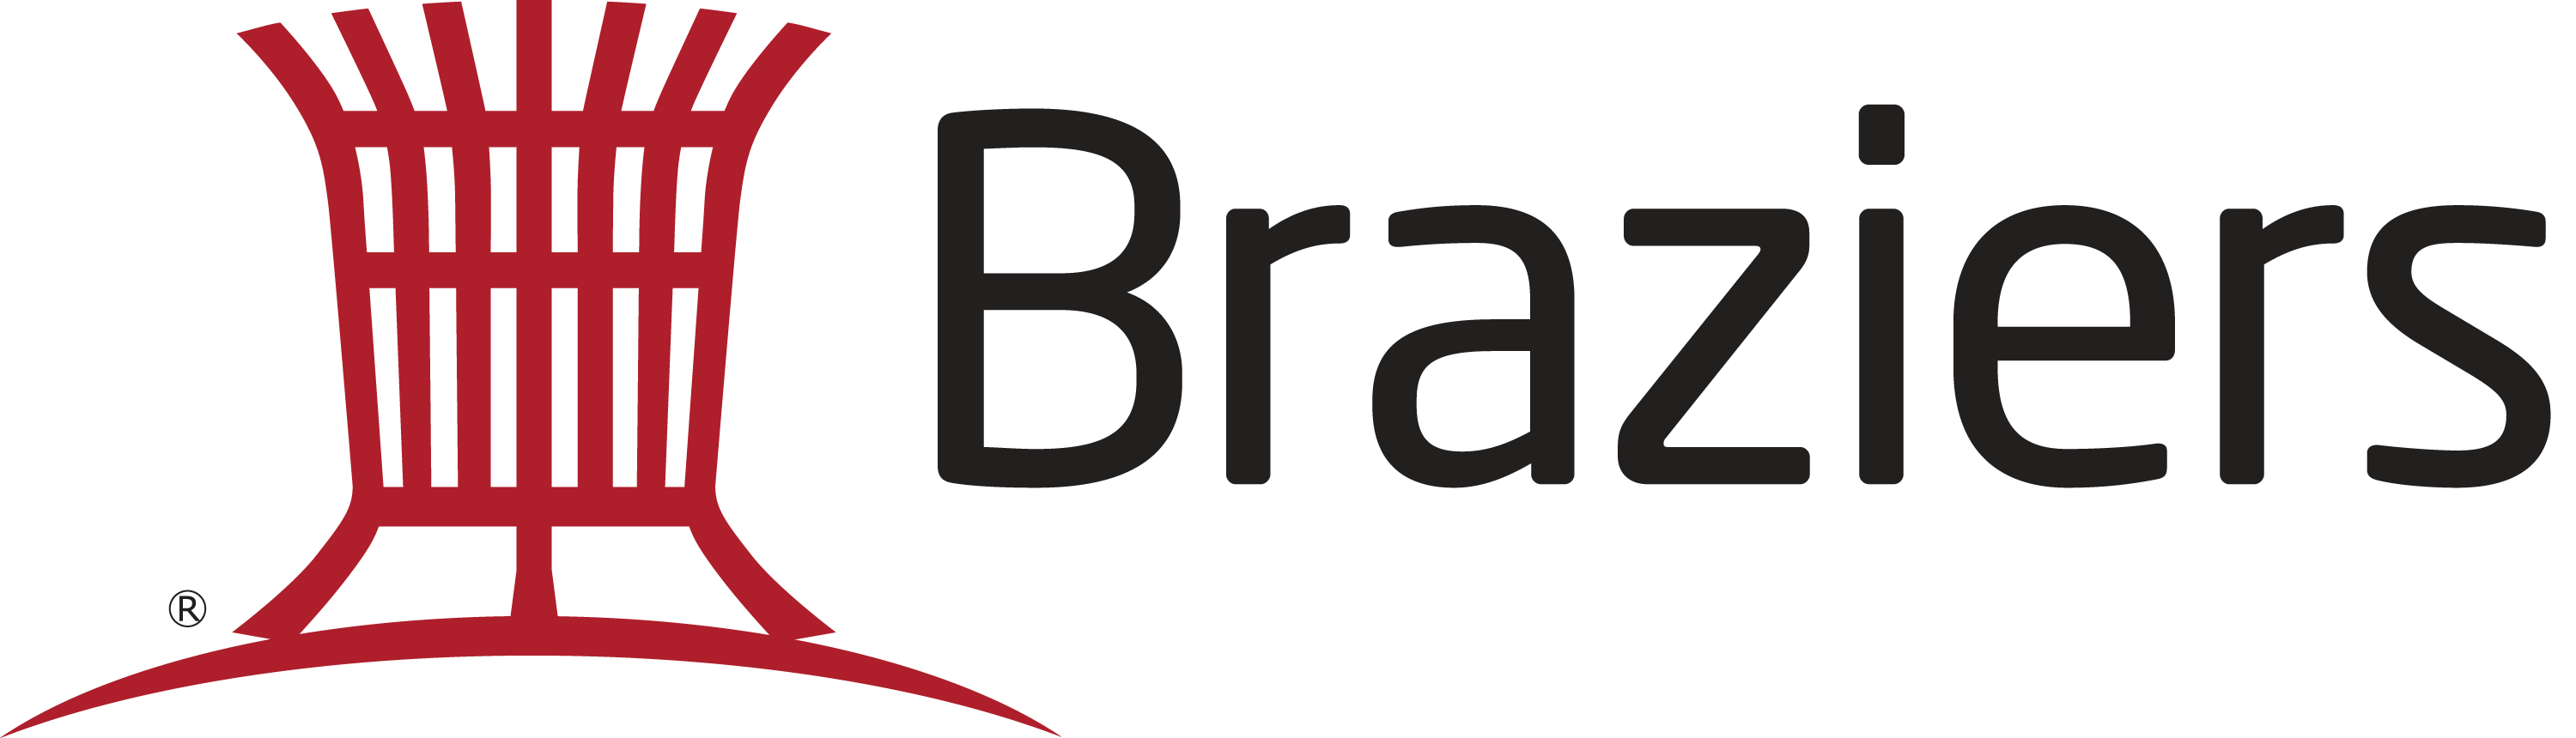 Property Manager, Braziers Property Management